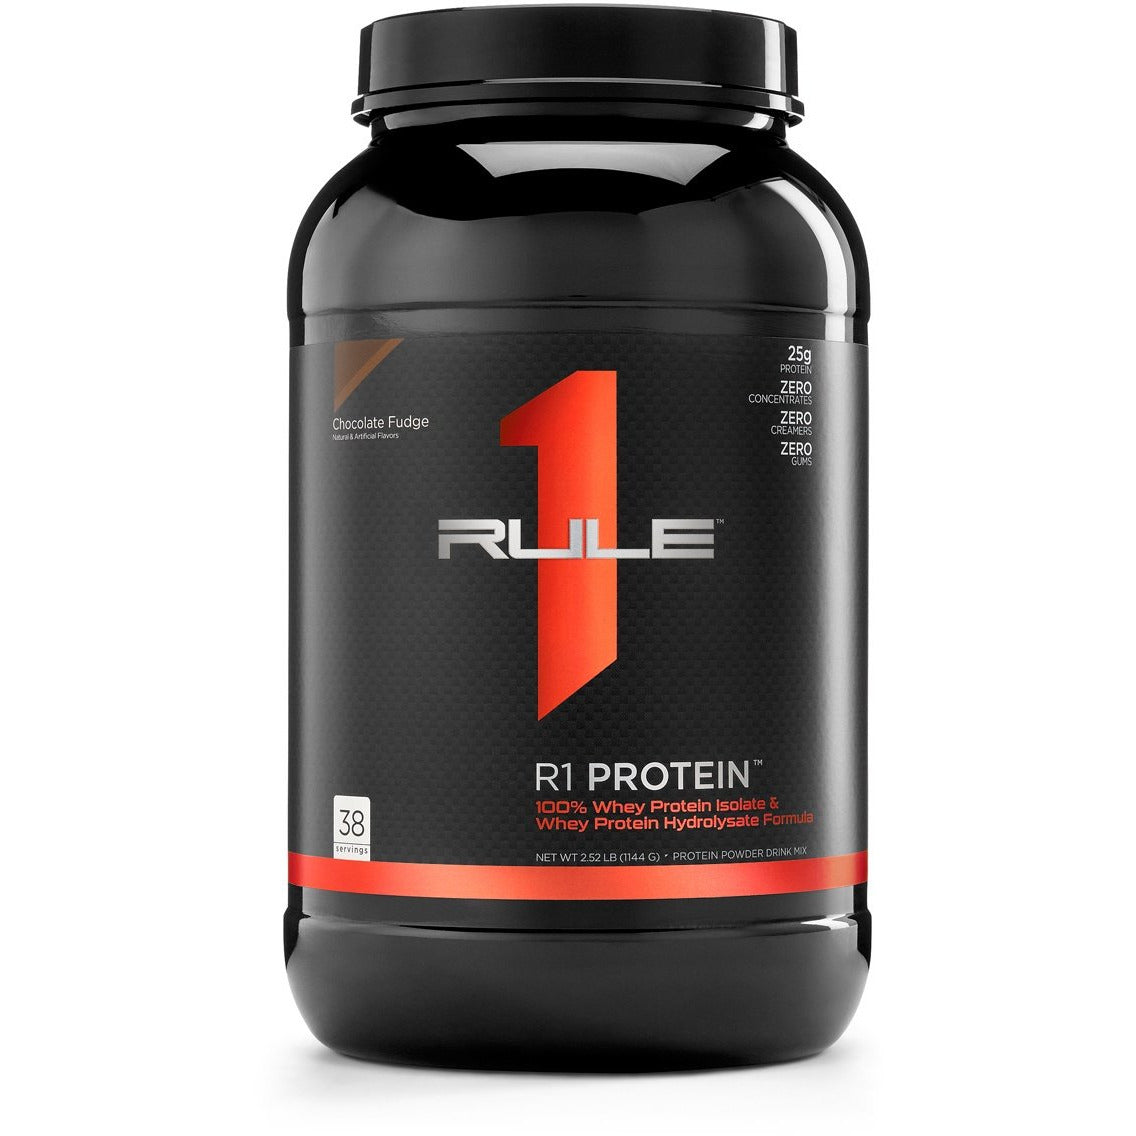 R1 PROTEIN // Whey Protein Isolate &amp; Hydrolyzed (29 Serve - 38 serve)